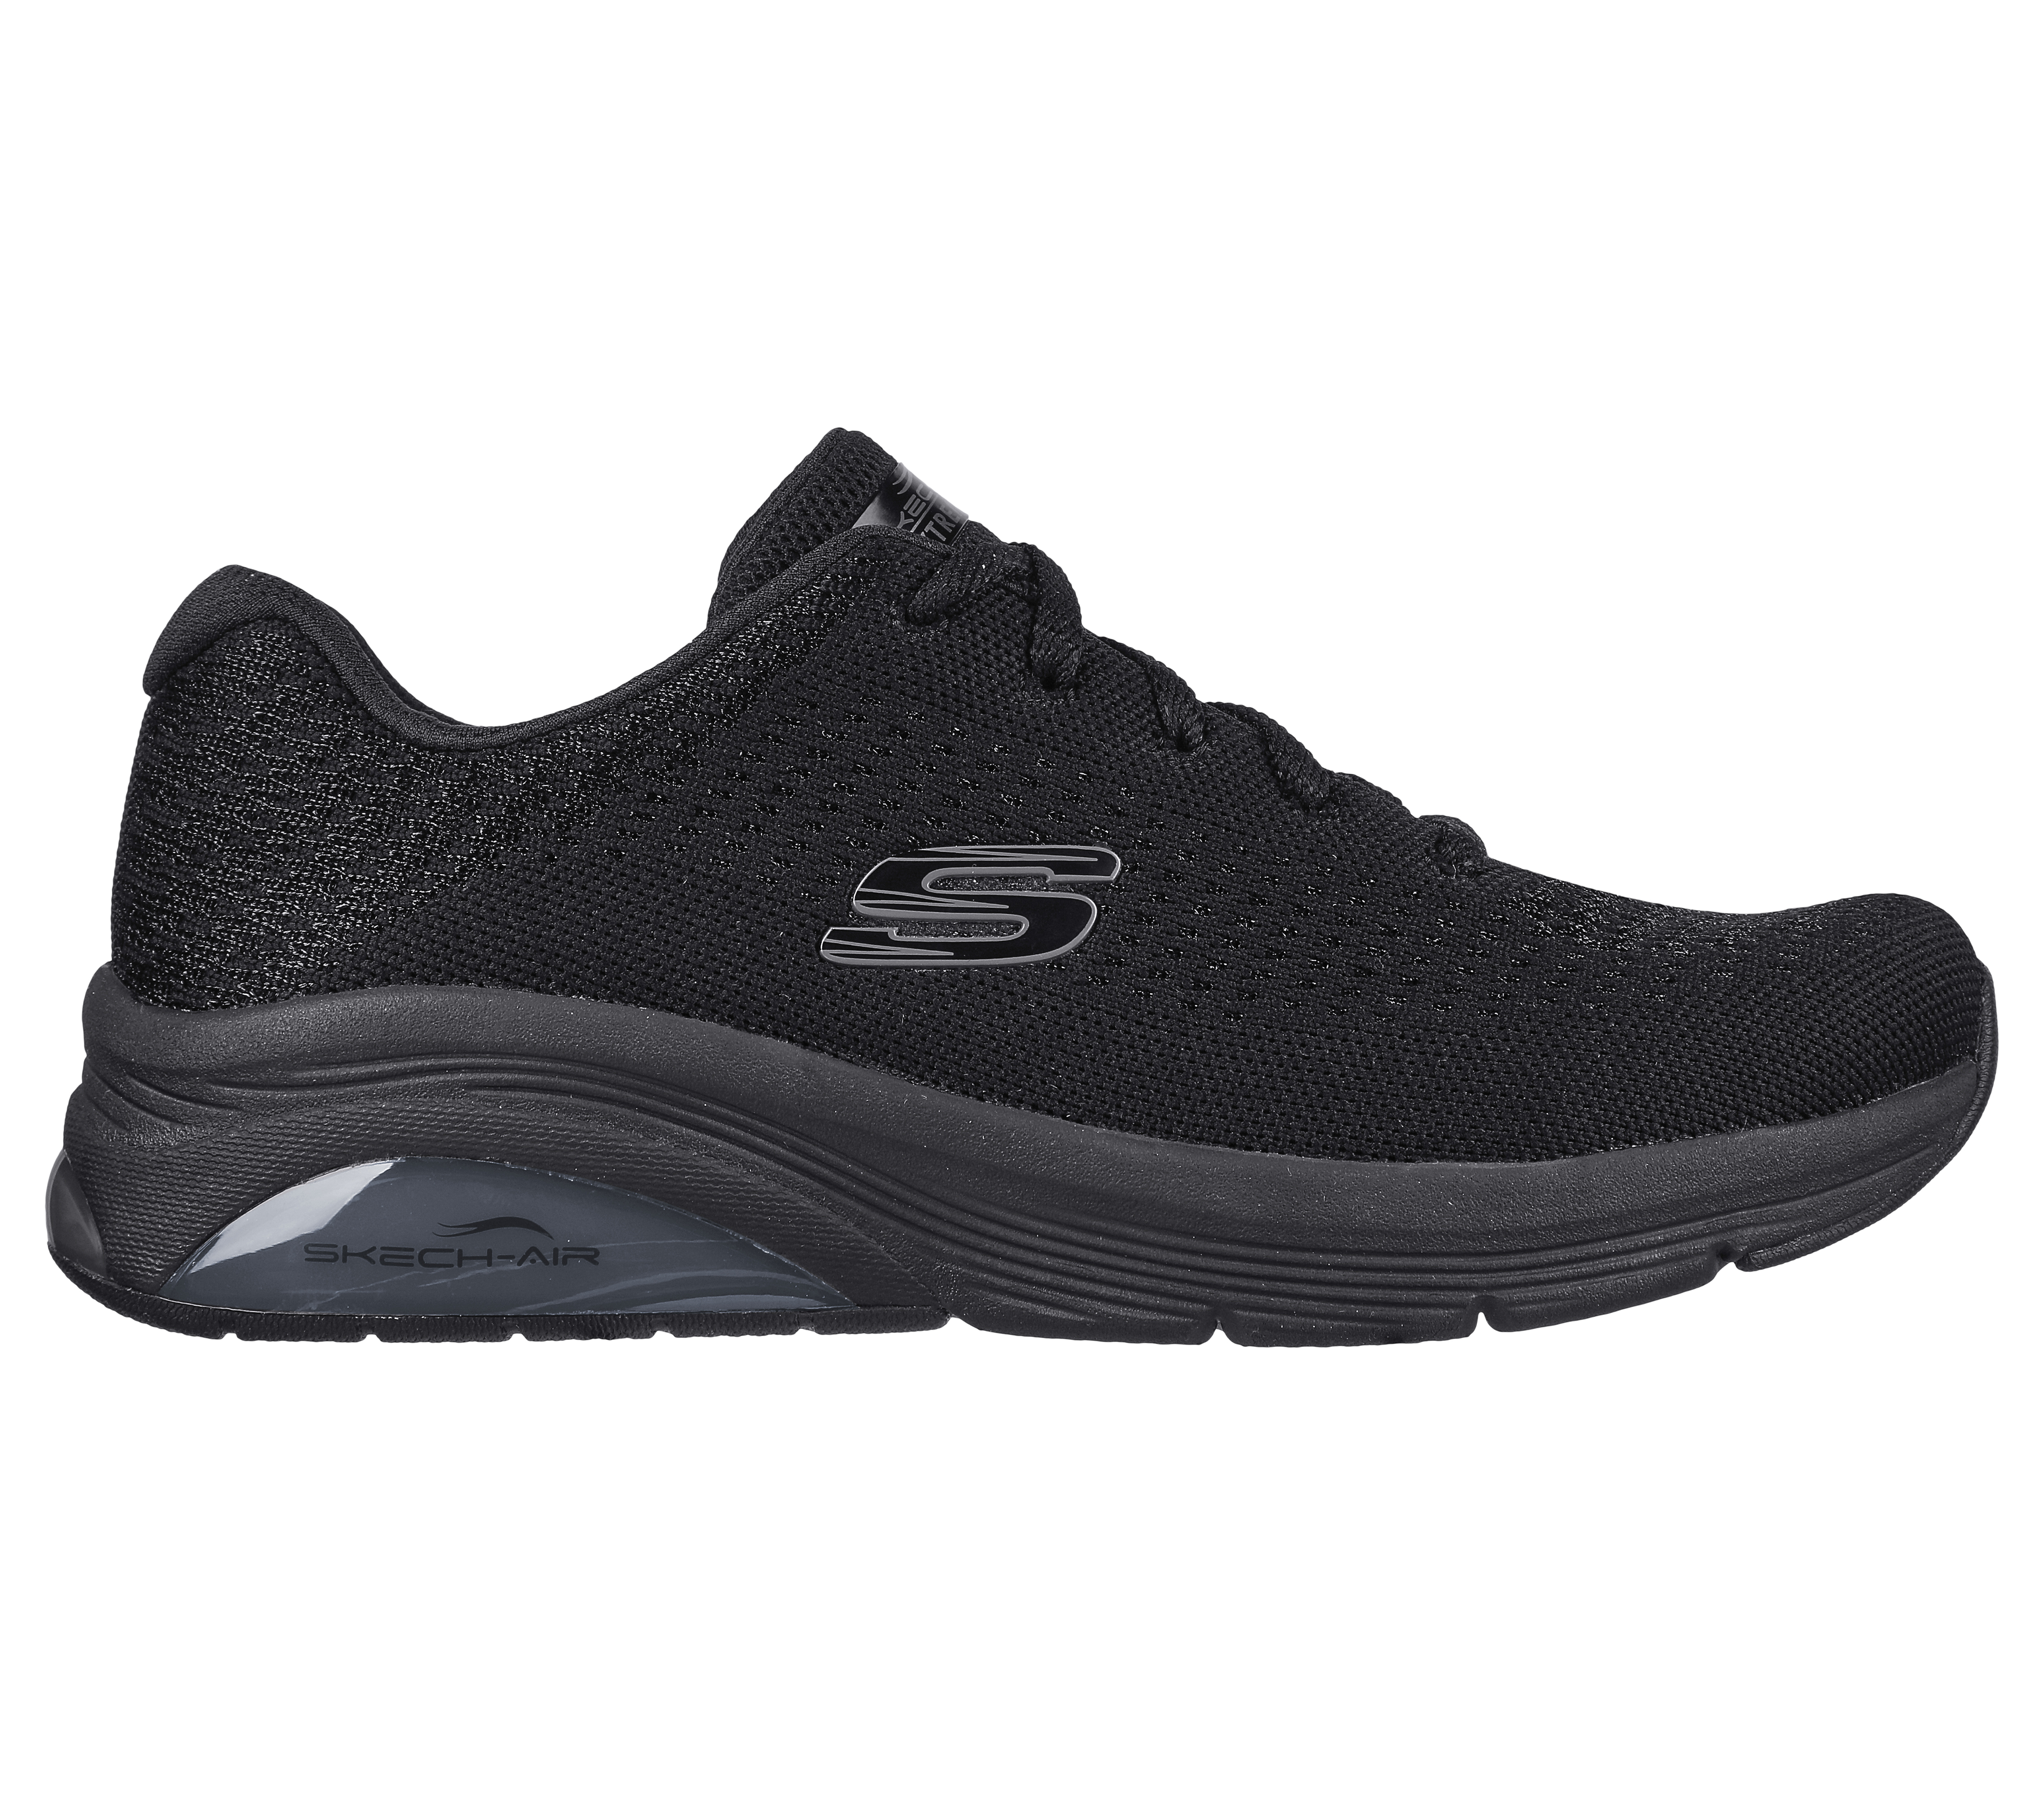 Skech-Air Extreme Classic Vibe | SKECHERS